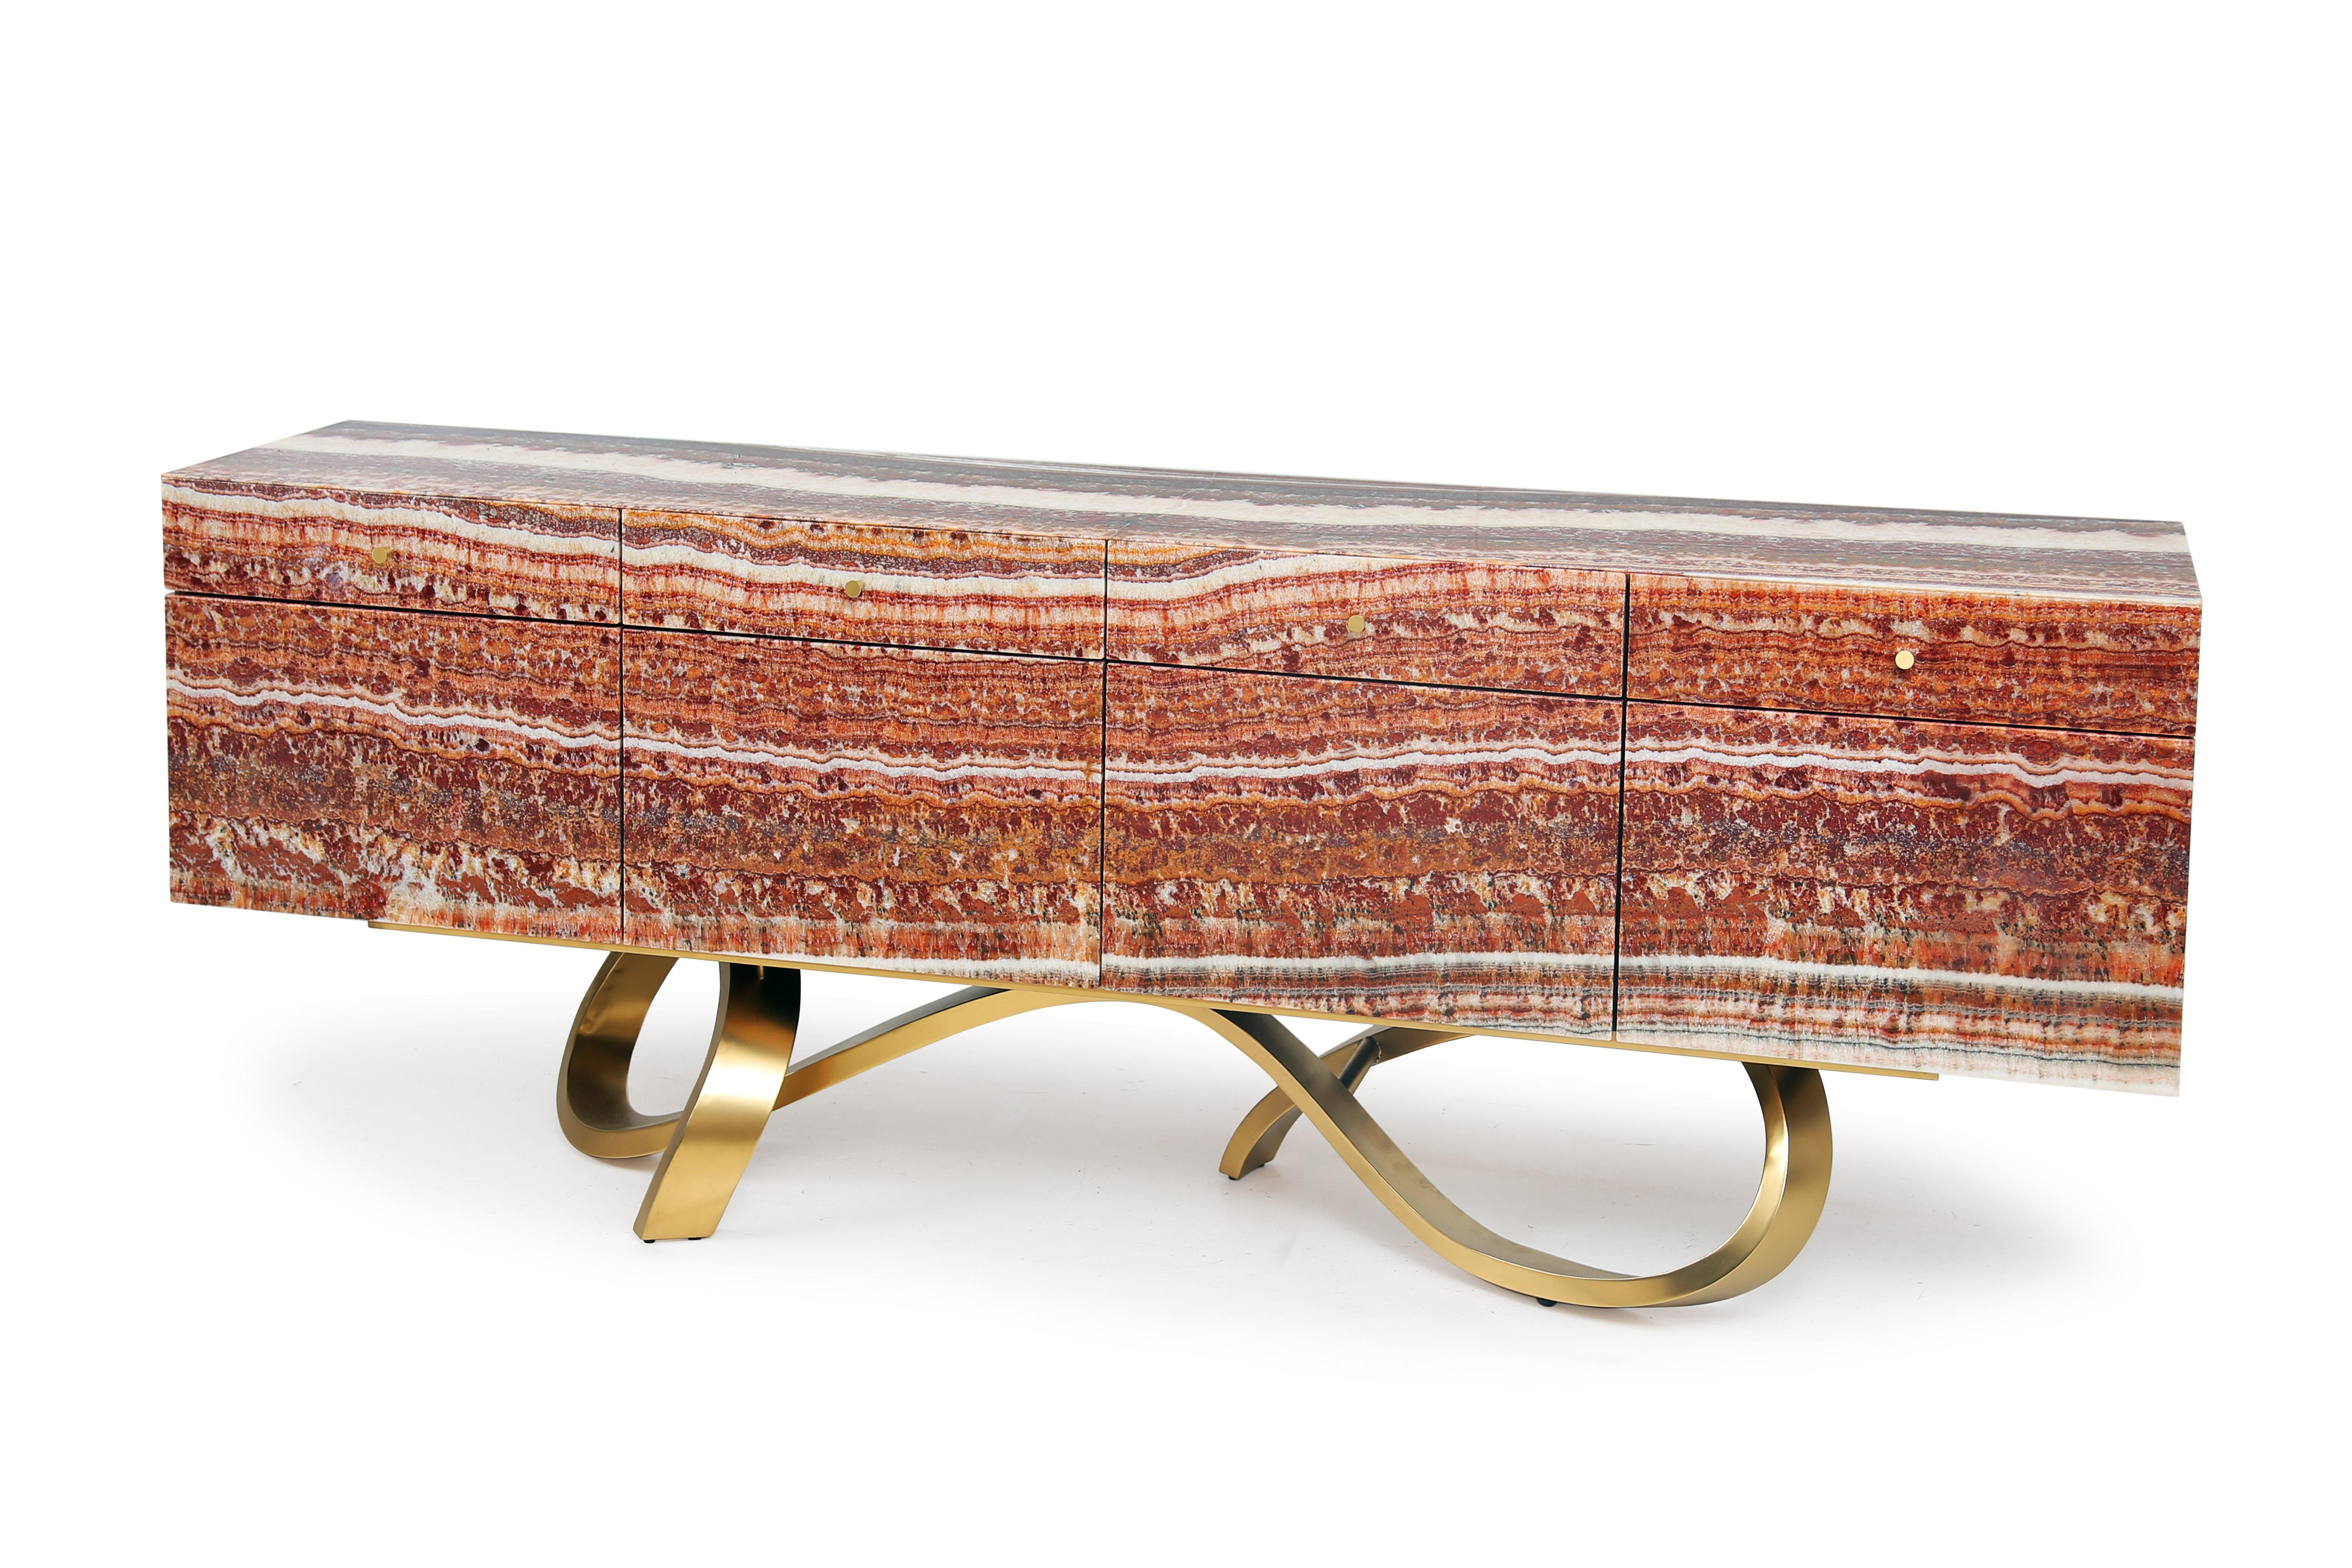 Sideboard Diablo

The Exclusive Red Passion Onyx stone Luxury Sideboard, the perfect union of materials, a harmony of forms. A luxurious seductive piece, handcrafted by Railis Design craftsmen with superb attention to detail. This unique sideboard